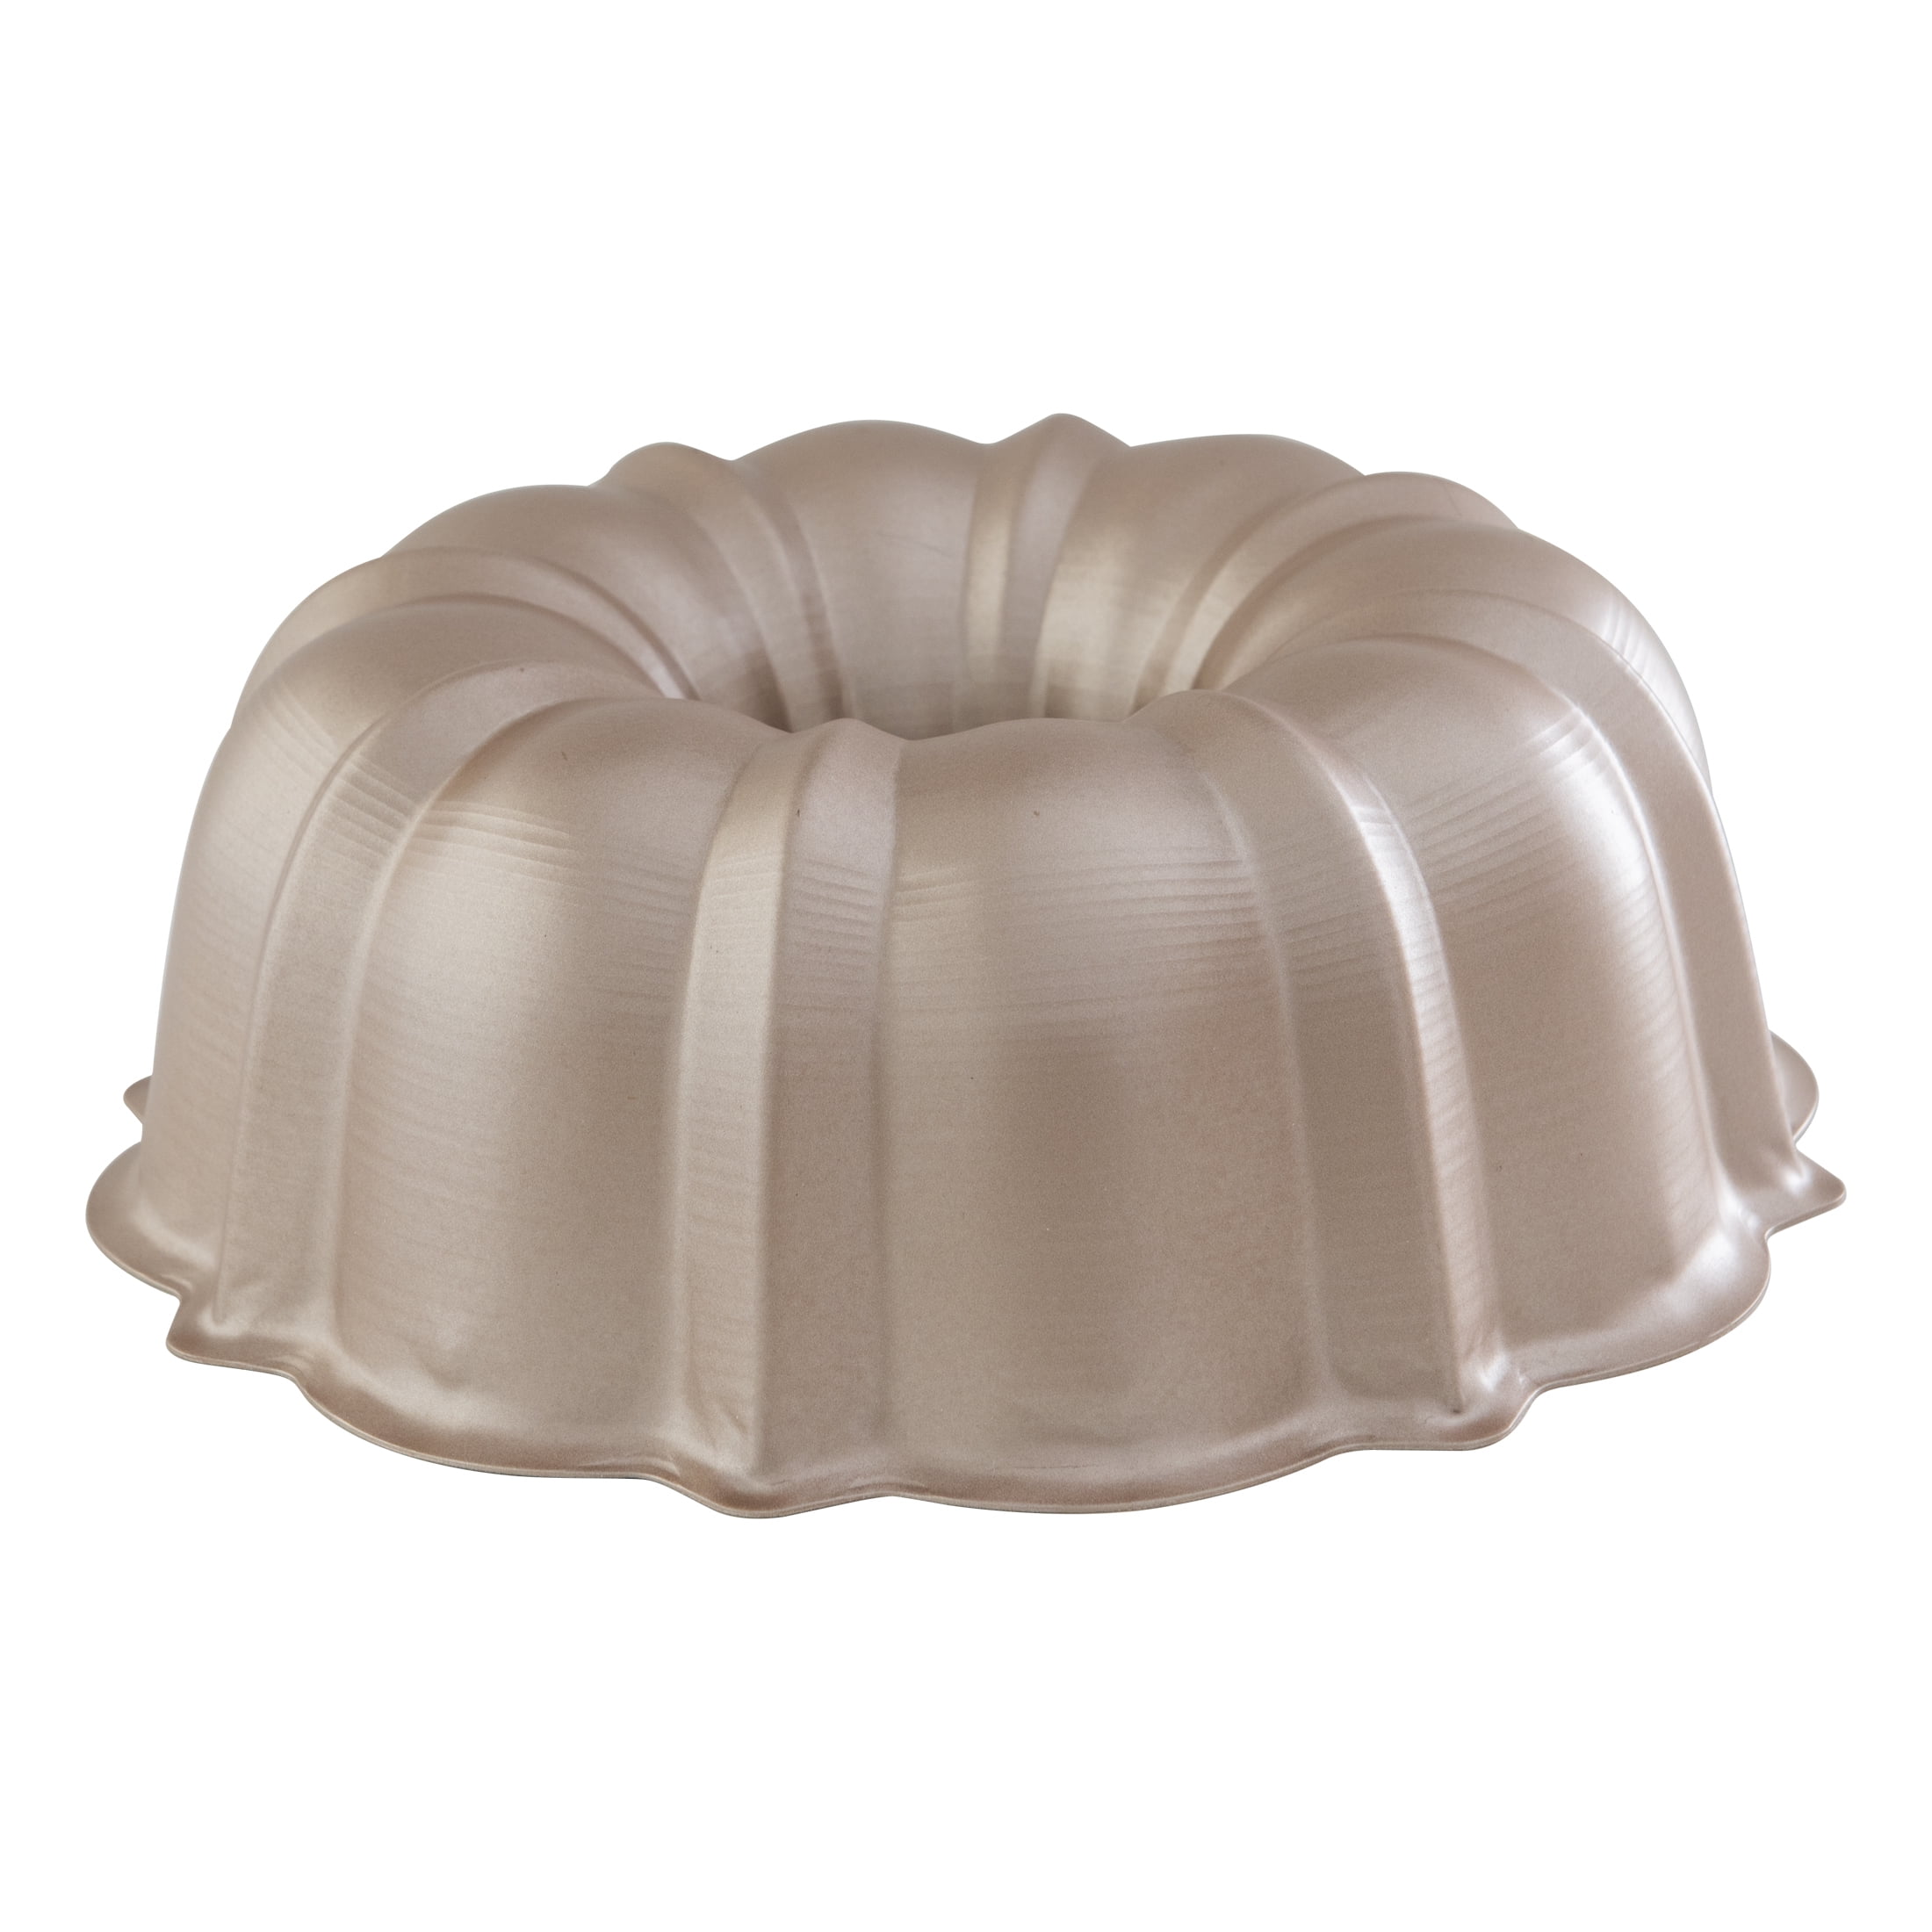 Nordicware Assorted Colors Bundt Pan - The Peppermill